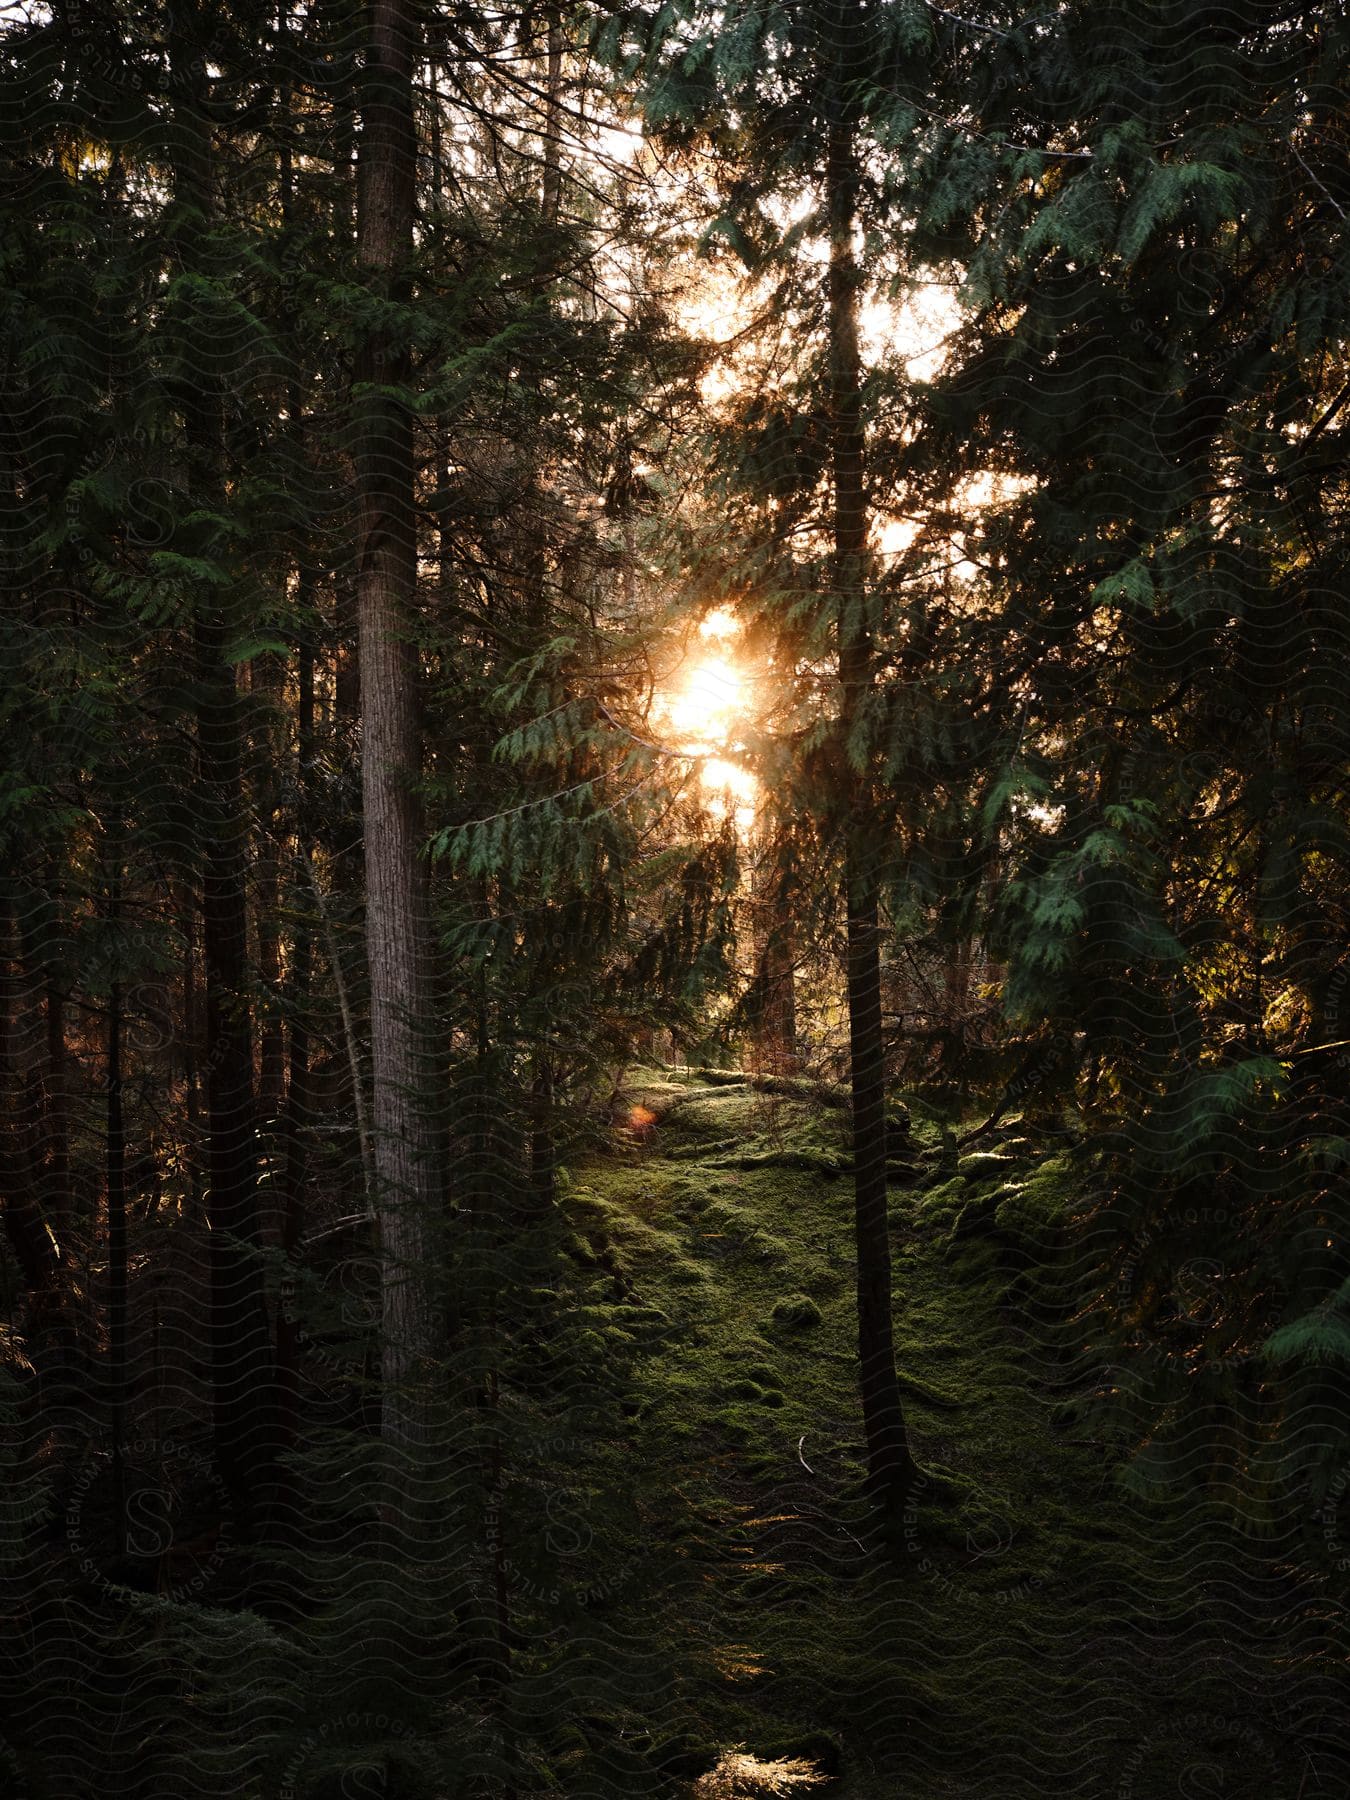 View inside a forest with a sunset on the horizon